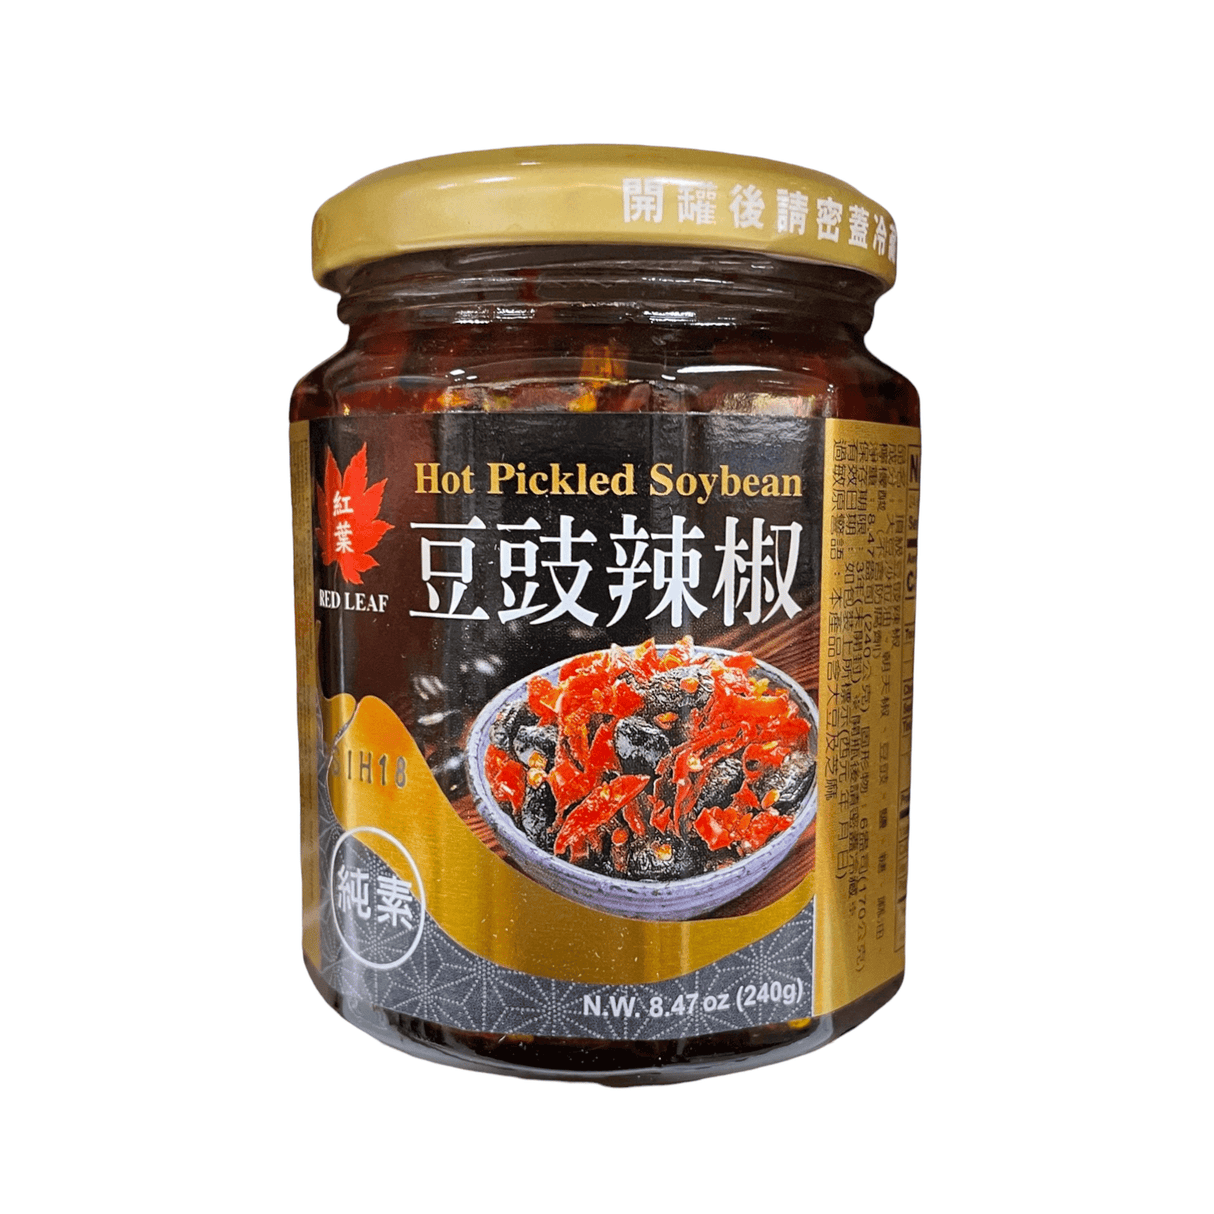 Red Leaf Hot Pickled Soybean